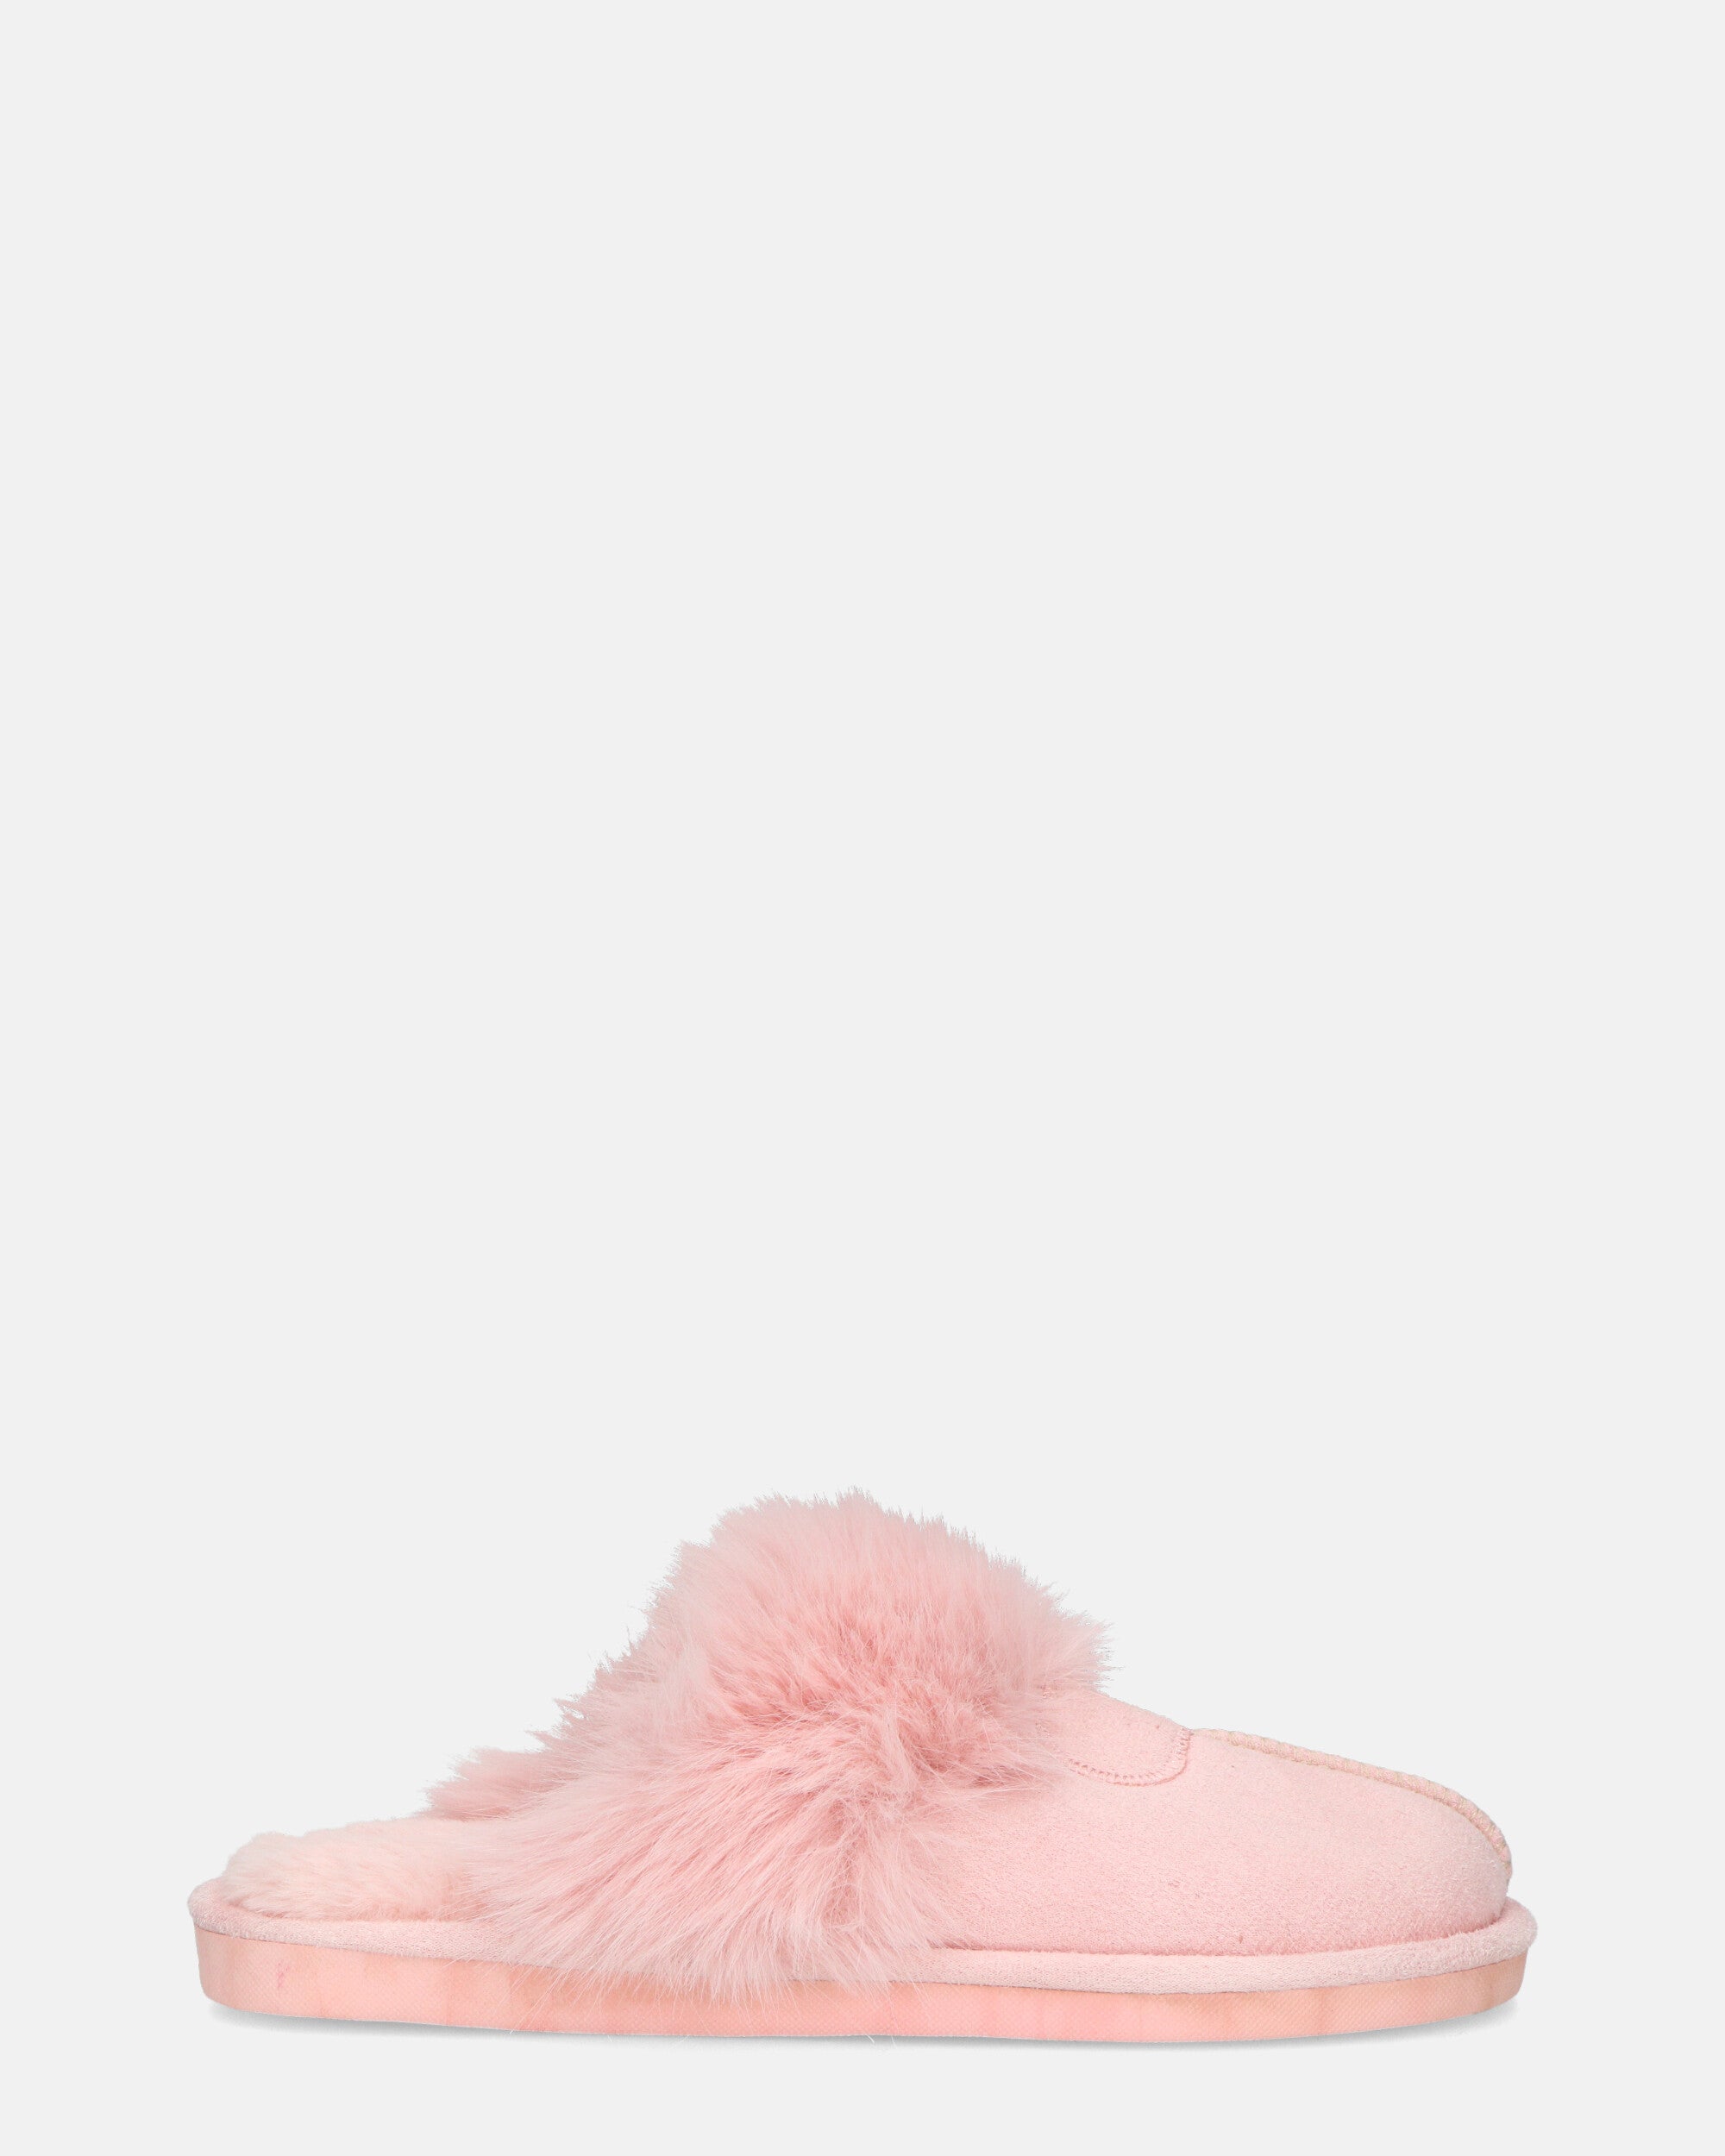 MIDORI - pink slippers with fur and suede